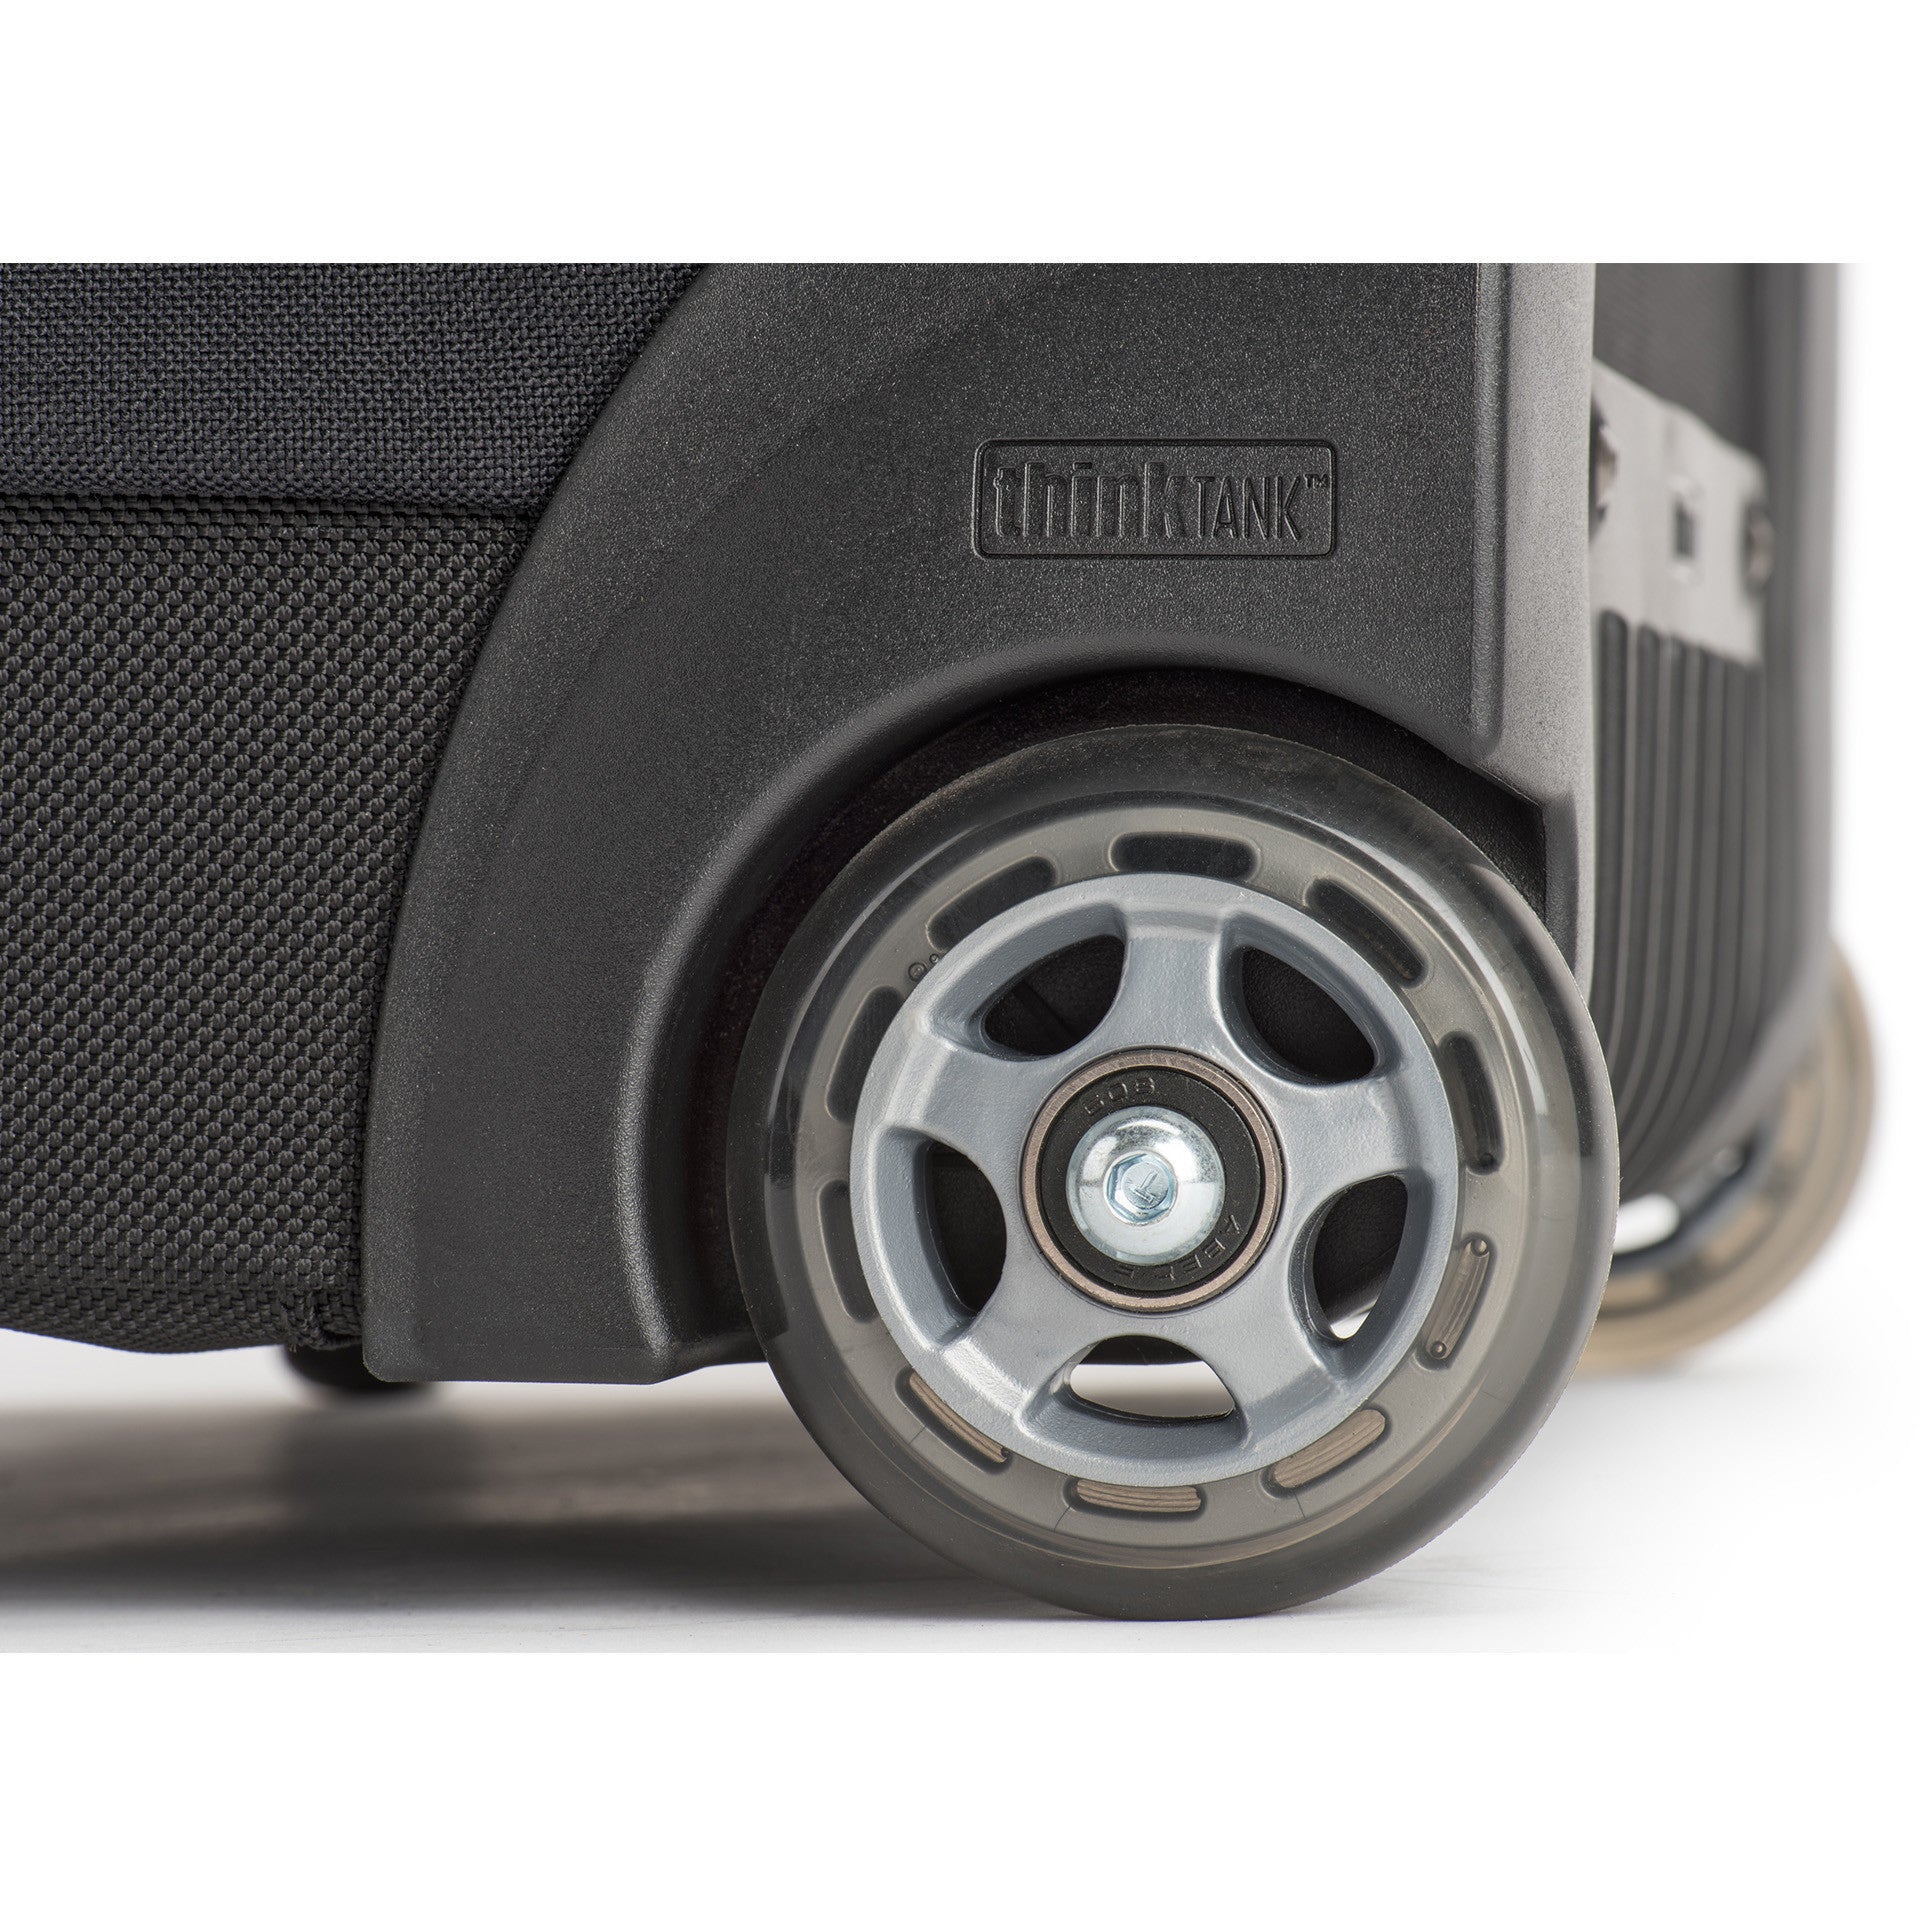 Custom-designed, high-performance, 80mm wheels with sealed ABEC grade 5 bearings for quiet rolling